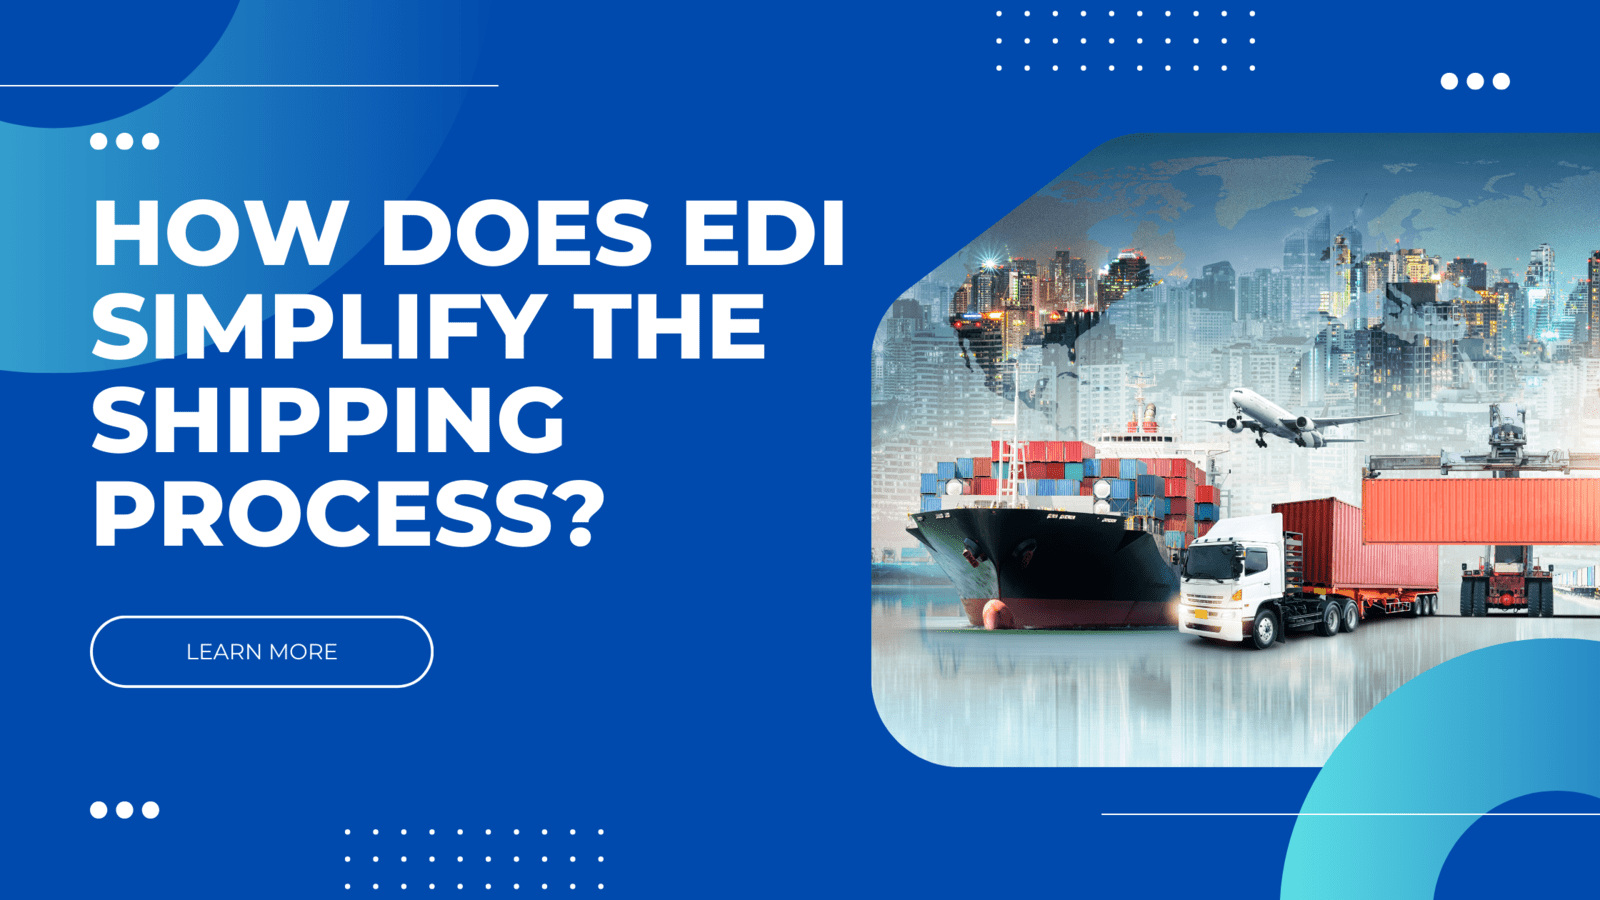 How does EDI simplify the shipping process?